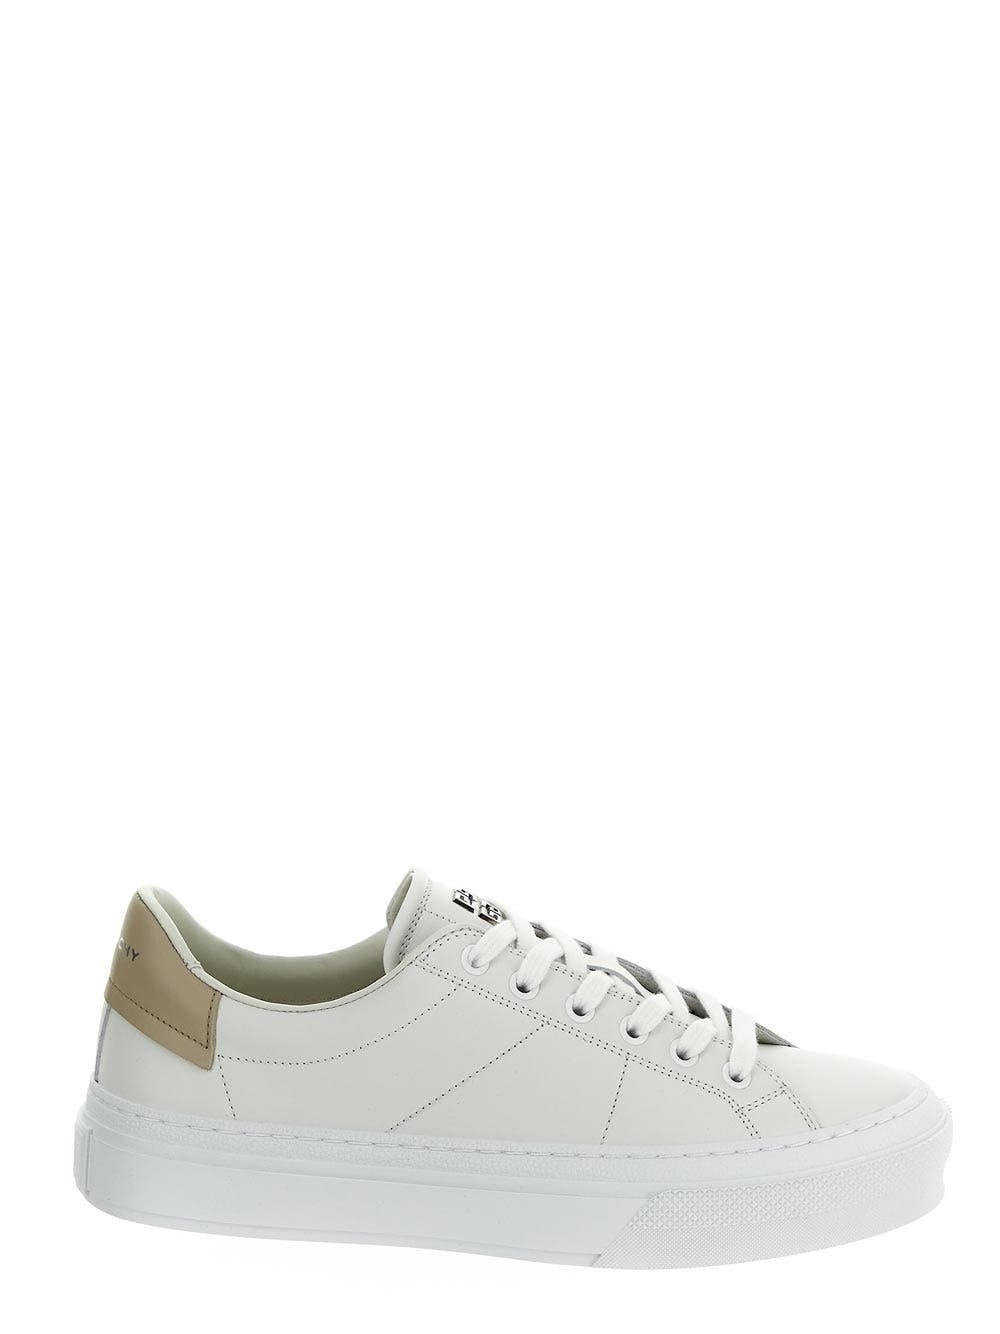 Photo: Givenchy City Sport Sneaker